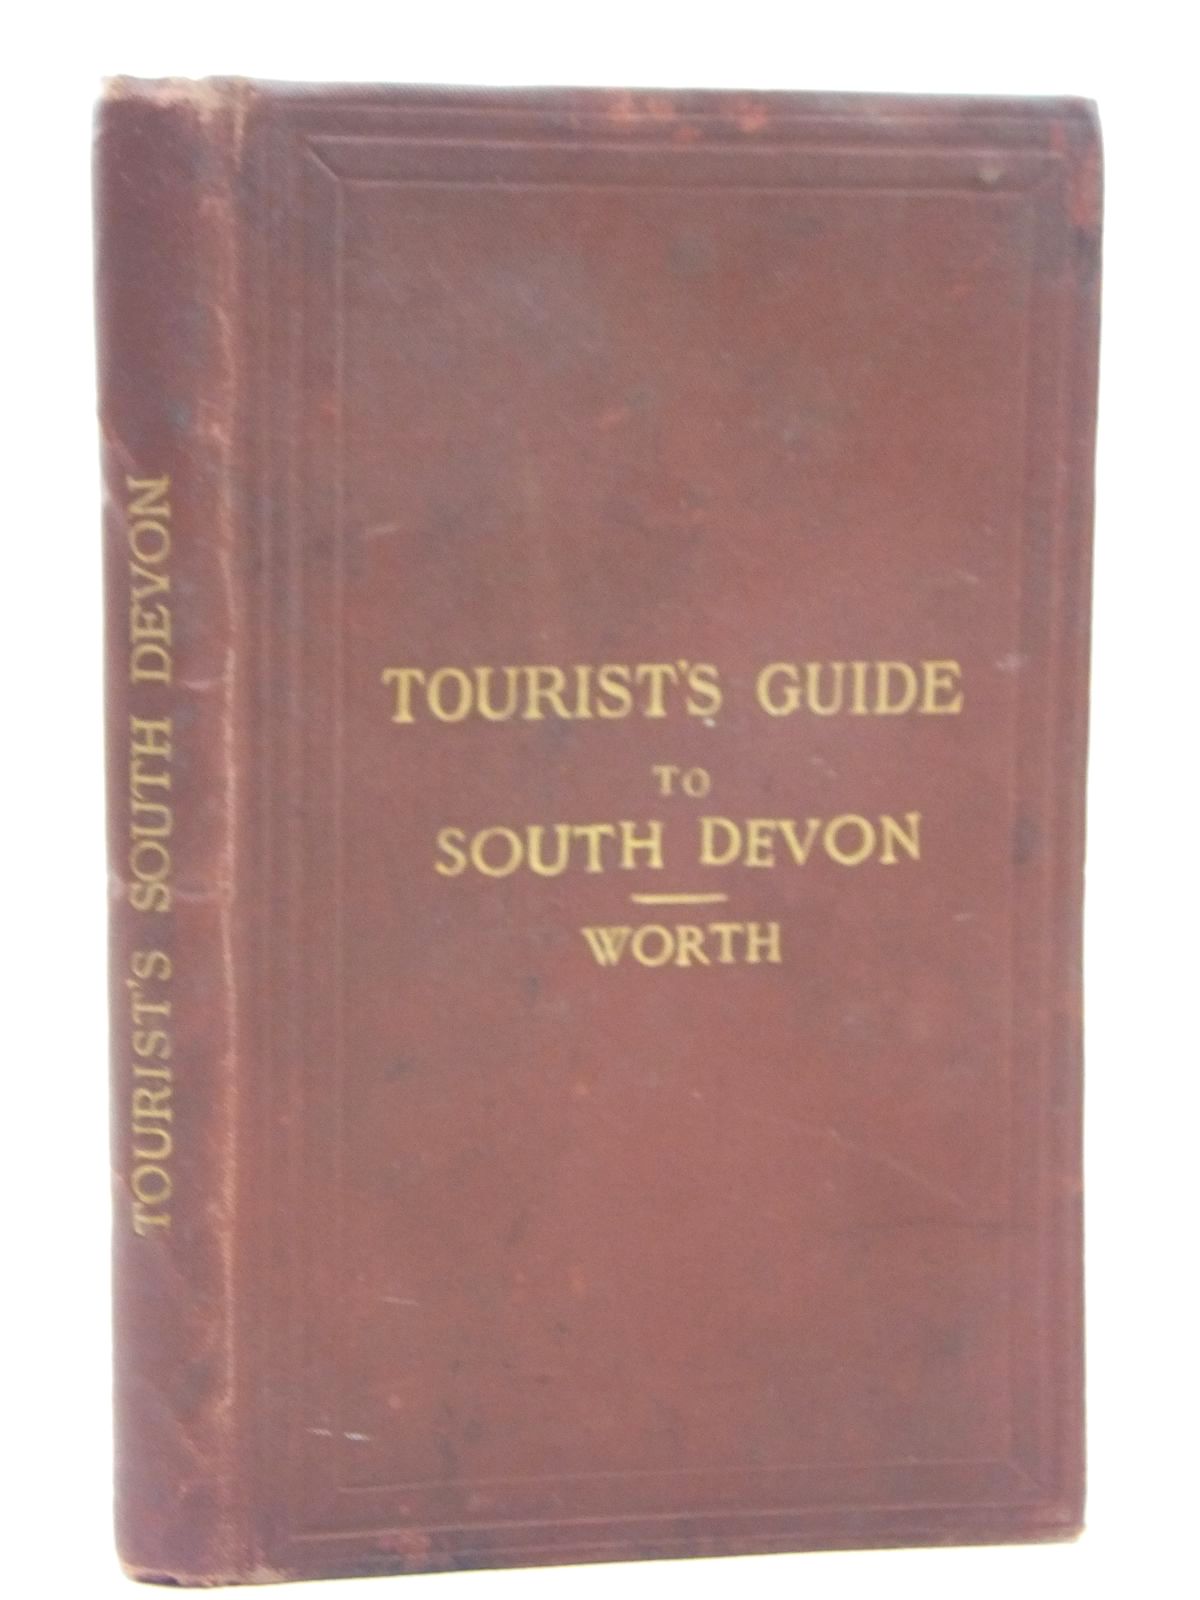 Photo of TOURIST'S GUIDE TO SOUTH DEVON written by Worth, R.N. published by Edward Stanford (STOCK CODE: 1609468)  for sale by Stella & Rose's Books